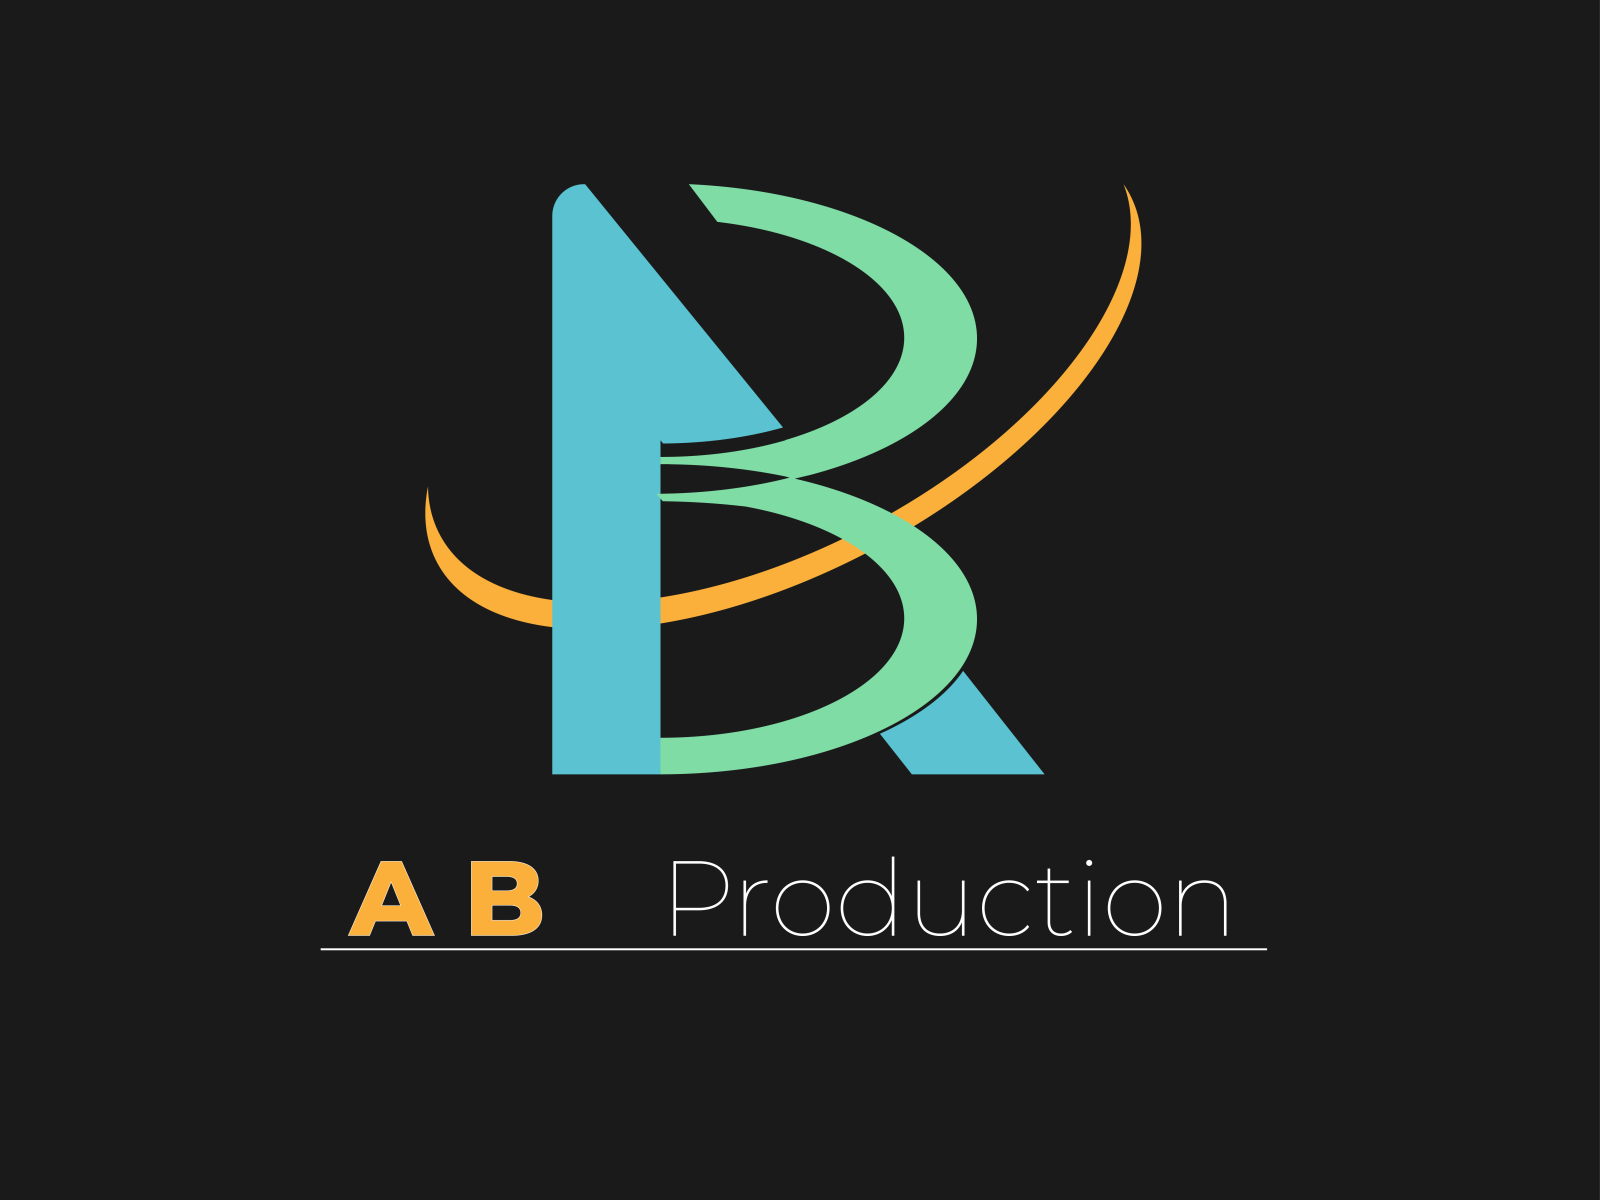 84 Ab Photography Logo Images, Stock Photos & Vectors | Shutterstock